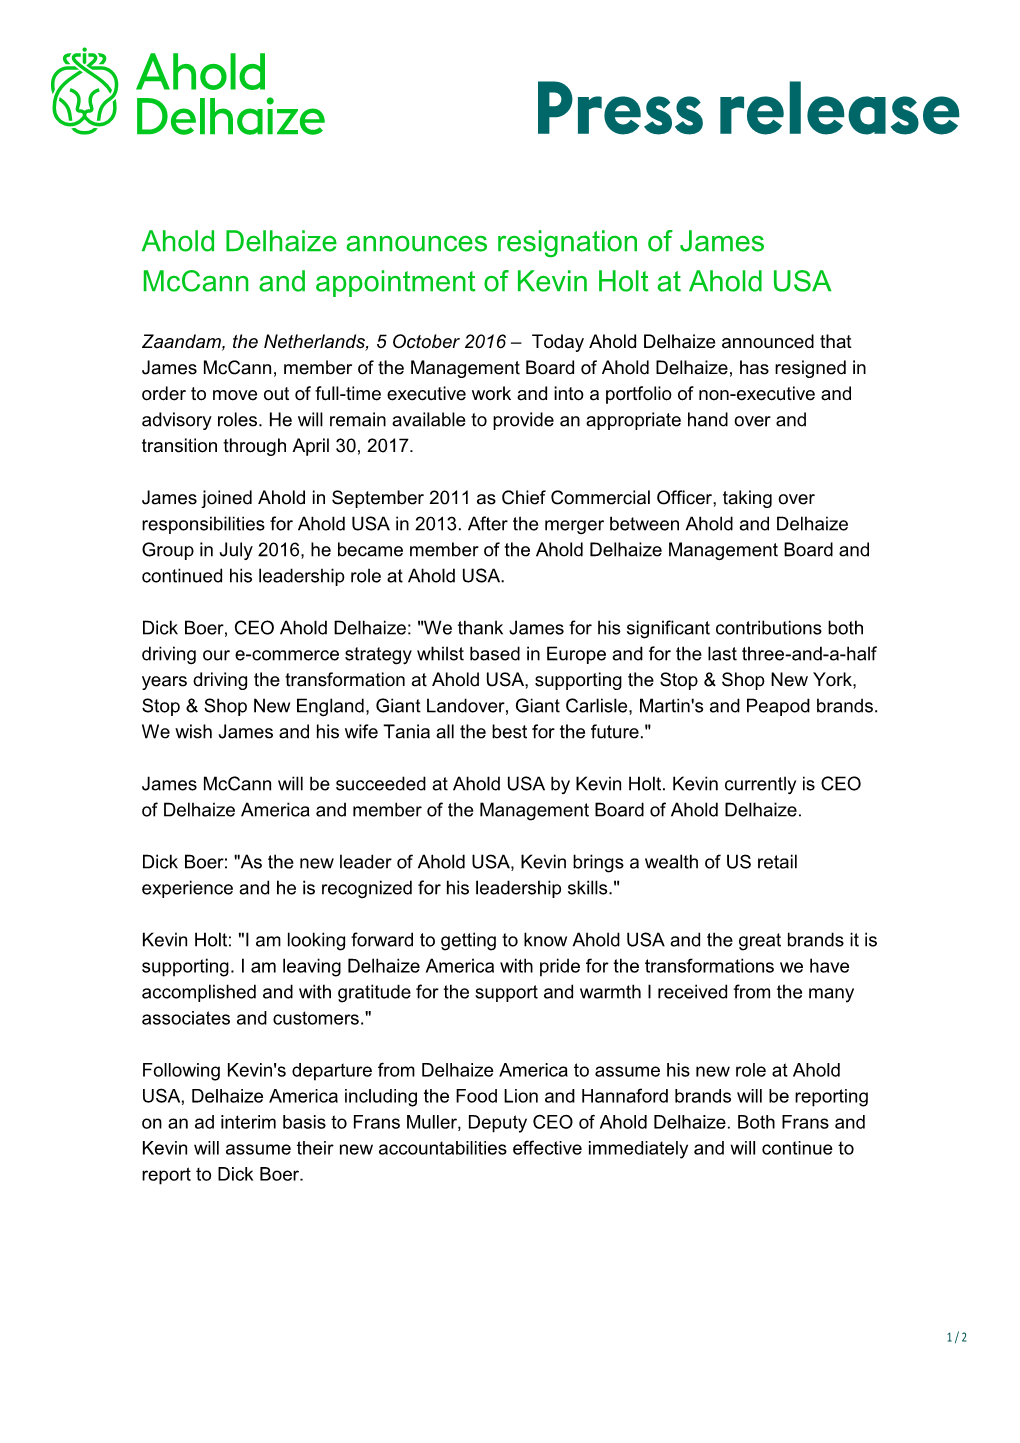 Ahold Delhaize Announces Resignation of James Mccann and Appointment of Kevin Holt at Ahold USA